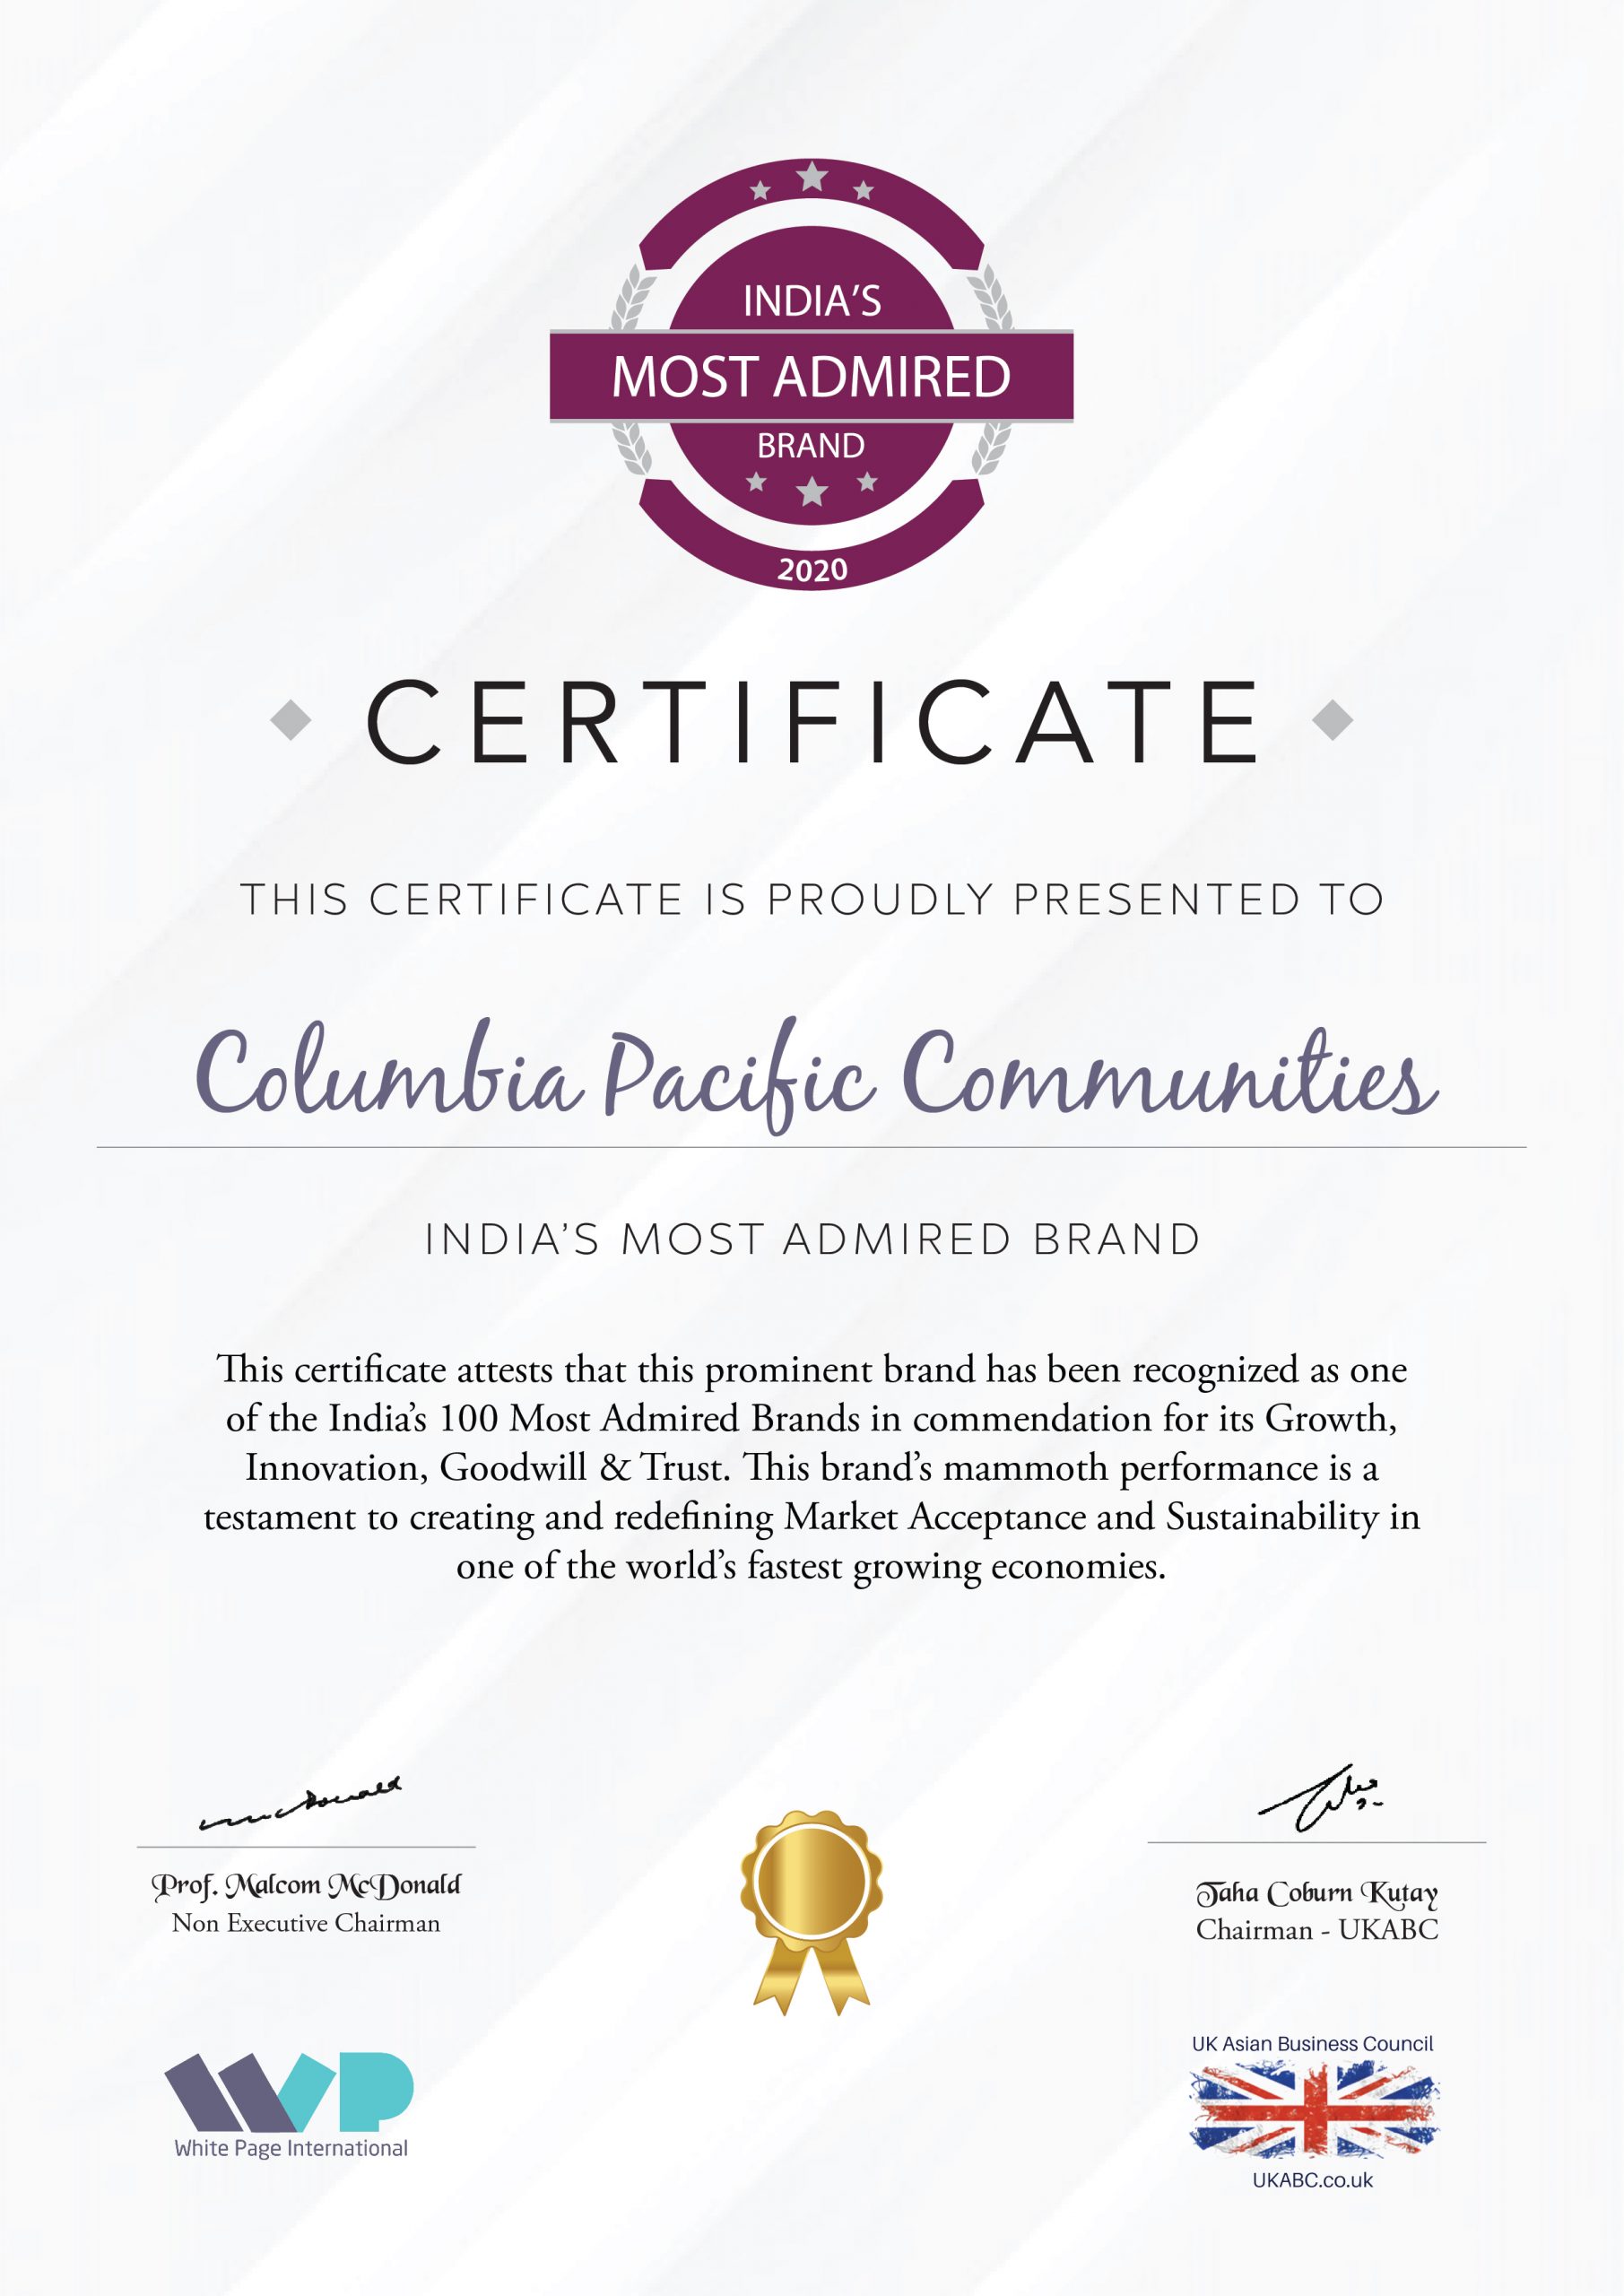 Columbia Pacific Communities recognised as one of the India’s 100 Most Admired Brands